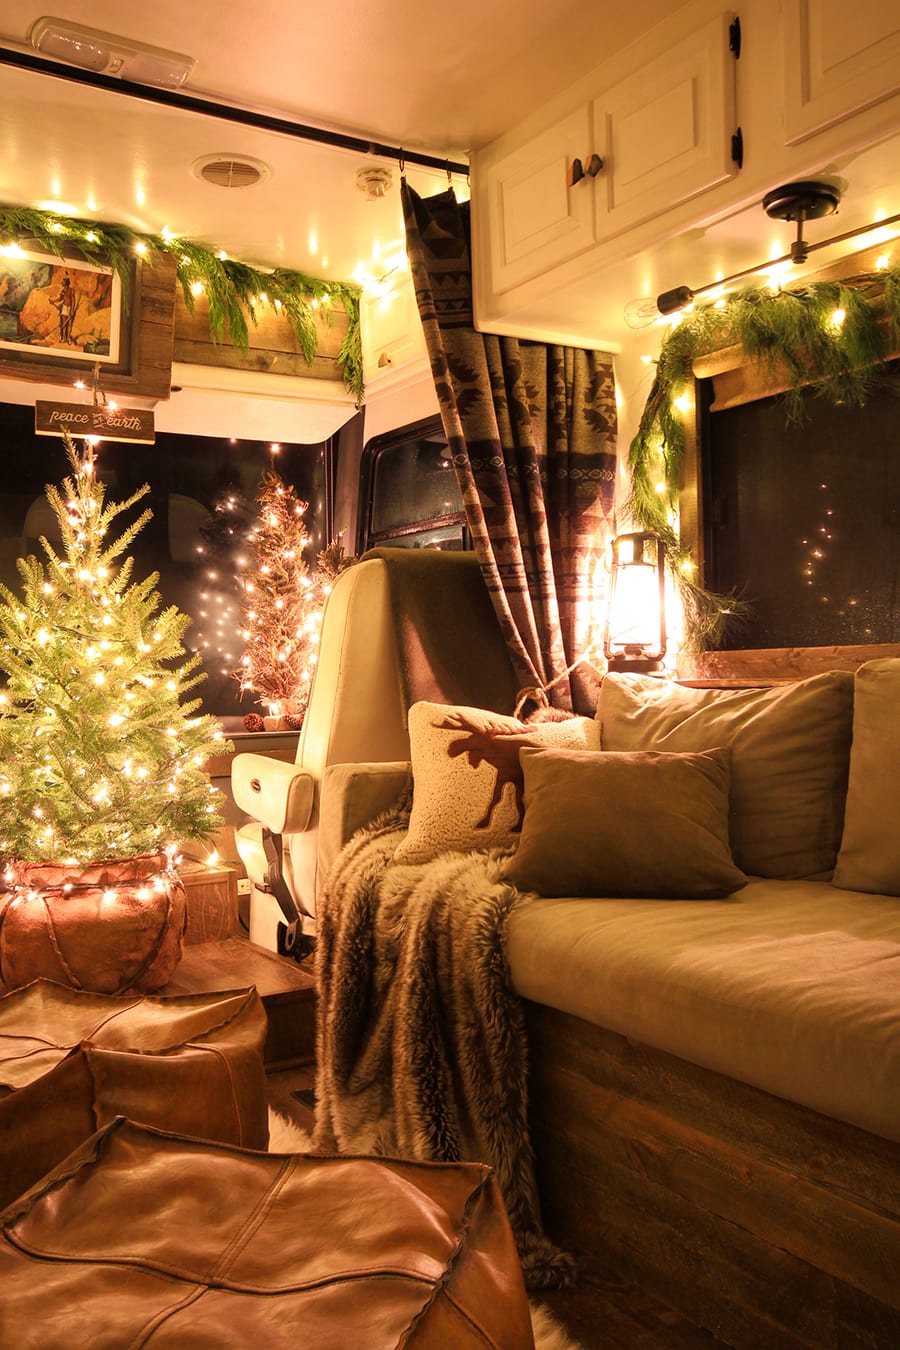 RV decorated for Christmas